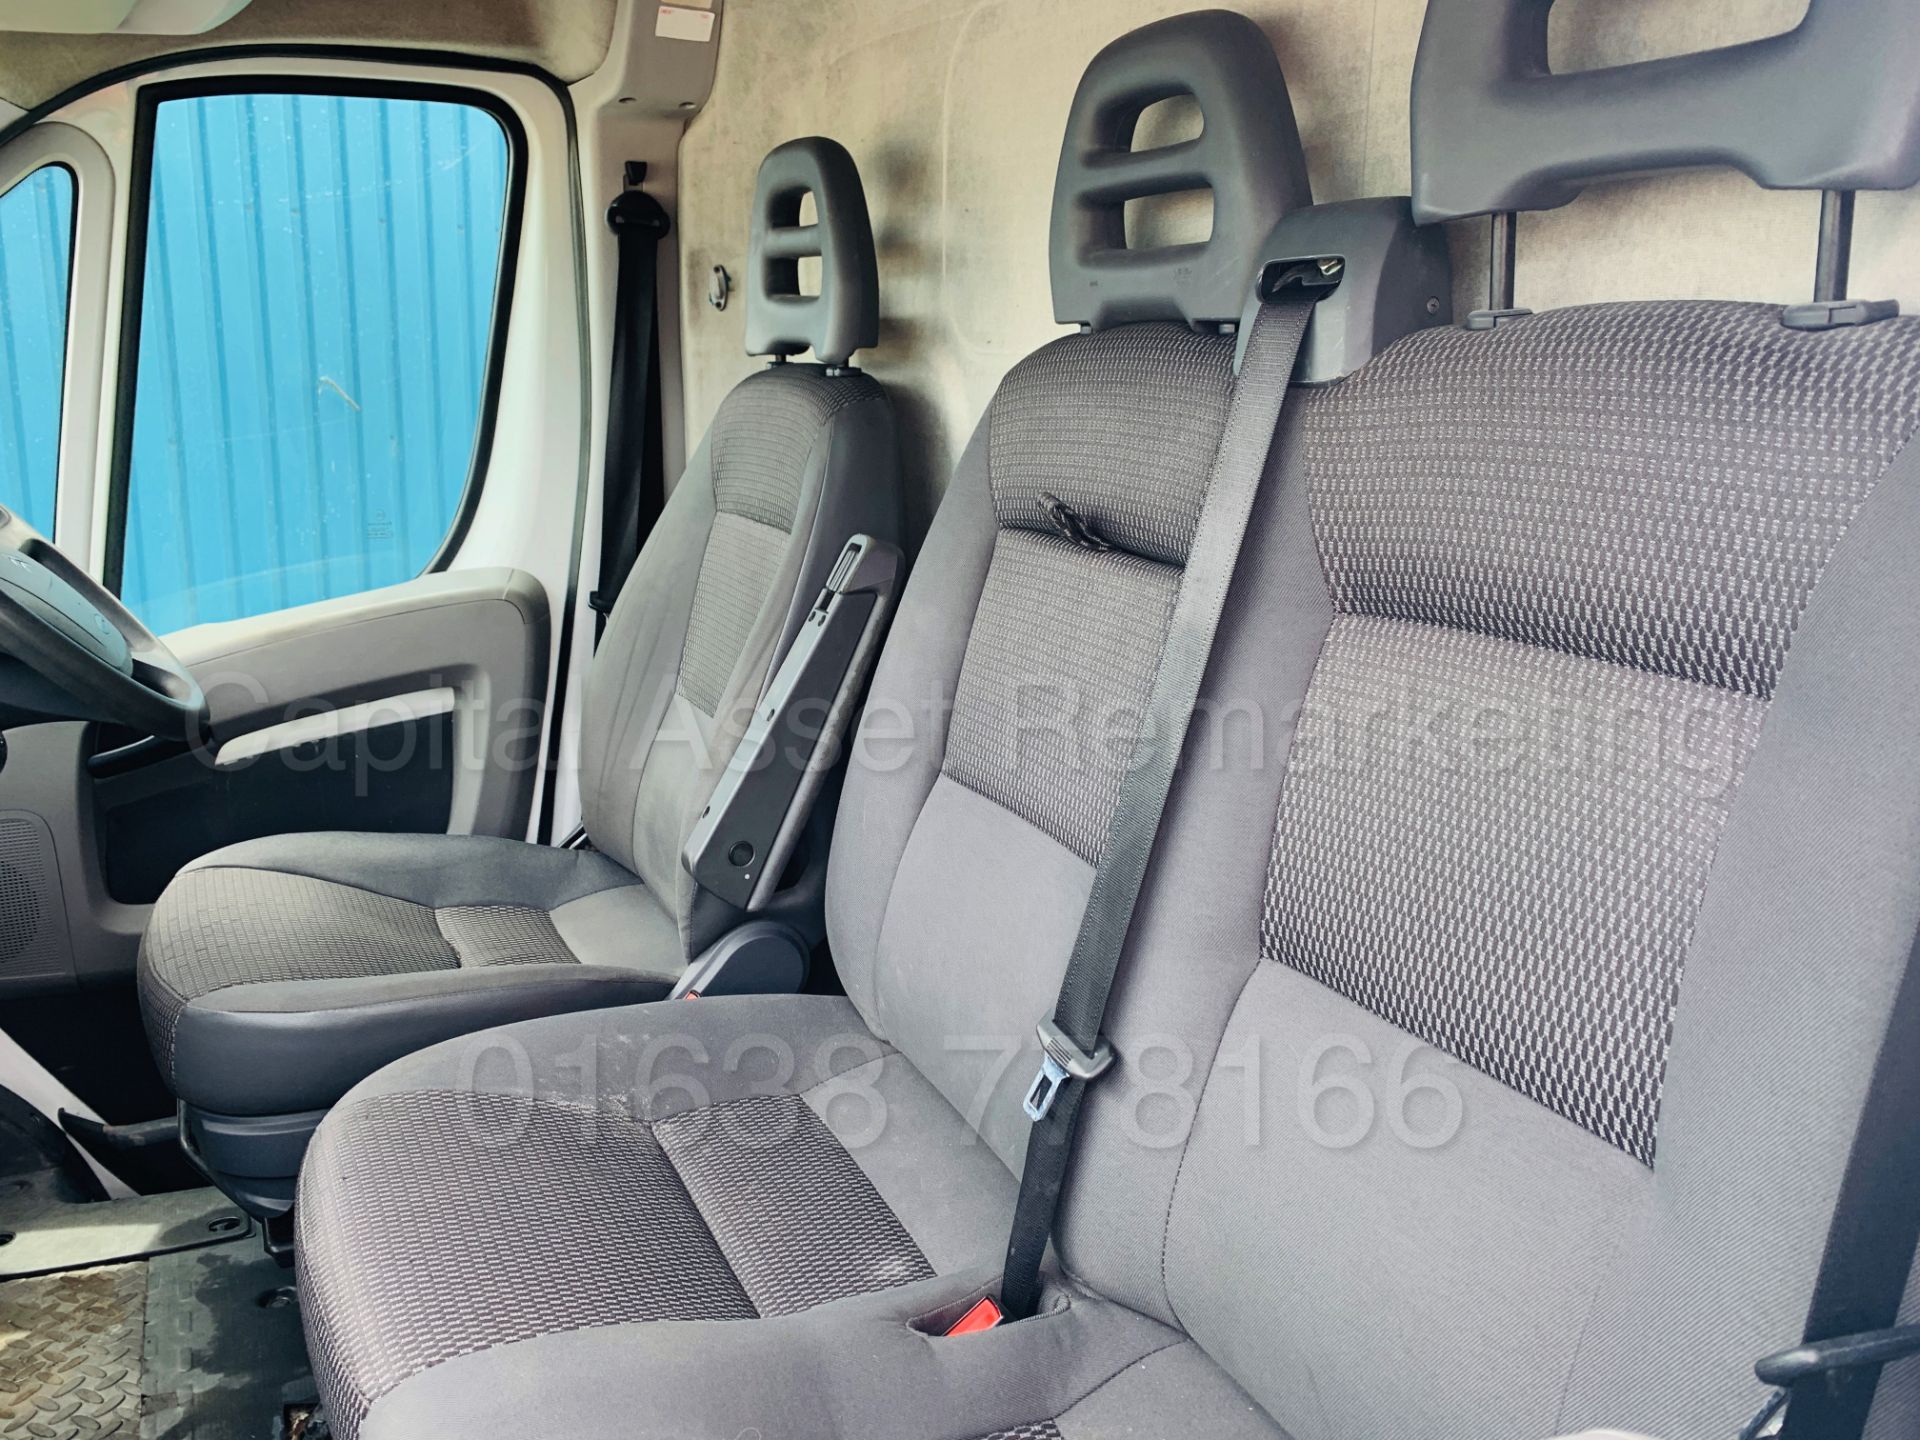 CITROEN RELAY 'L4 EXTRA LWB HI-ROOF' (2010 MODEL) '2.2 HDI - 120 BHP - 6 SPEED' (3500 KG) *AIR CON* - Image 18 of 34